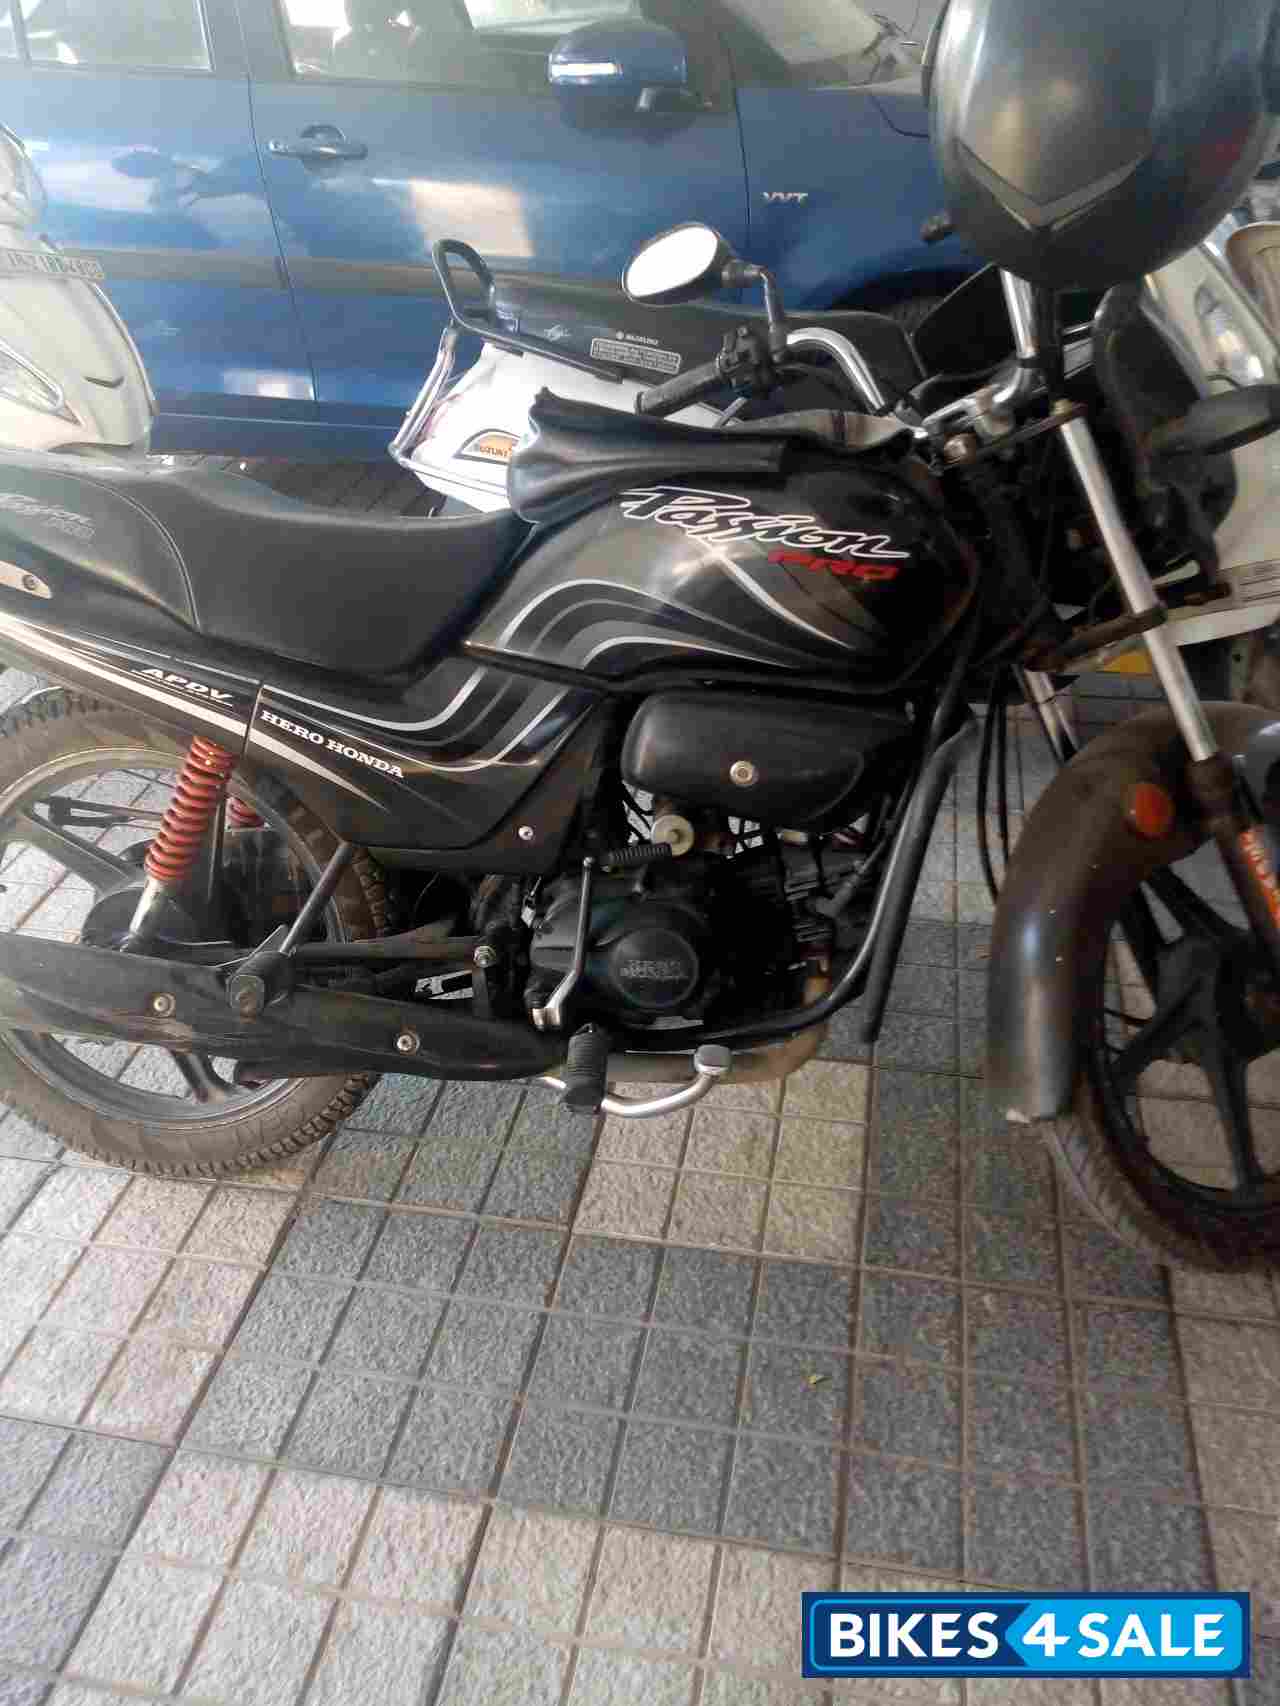 Used 2010 model Hero Passion Pro for sale in Kurnool